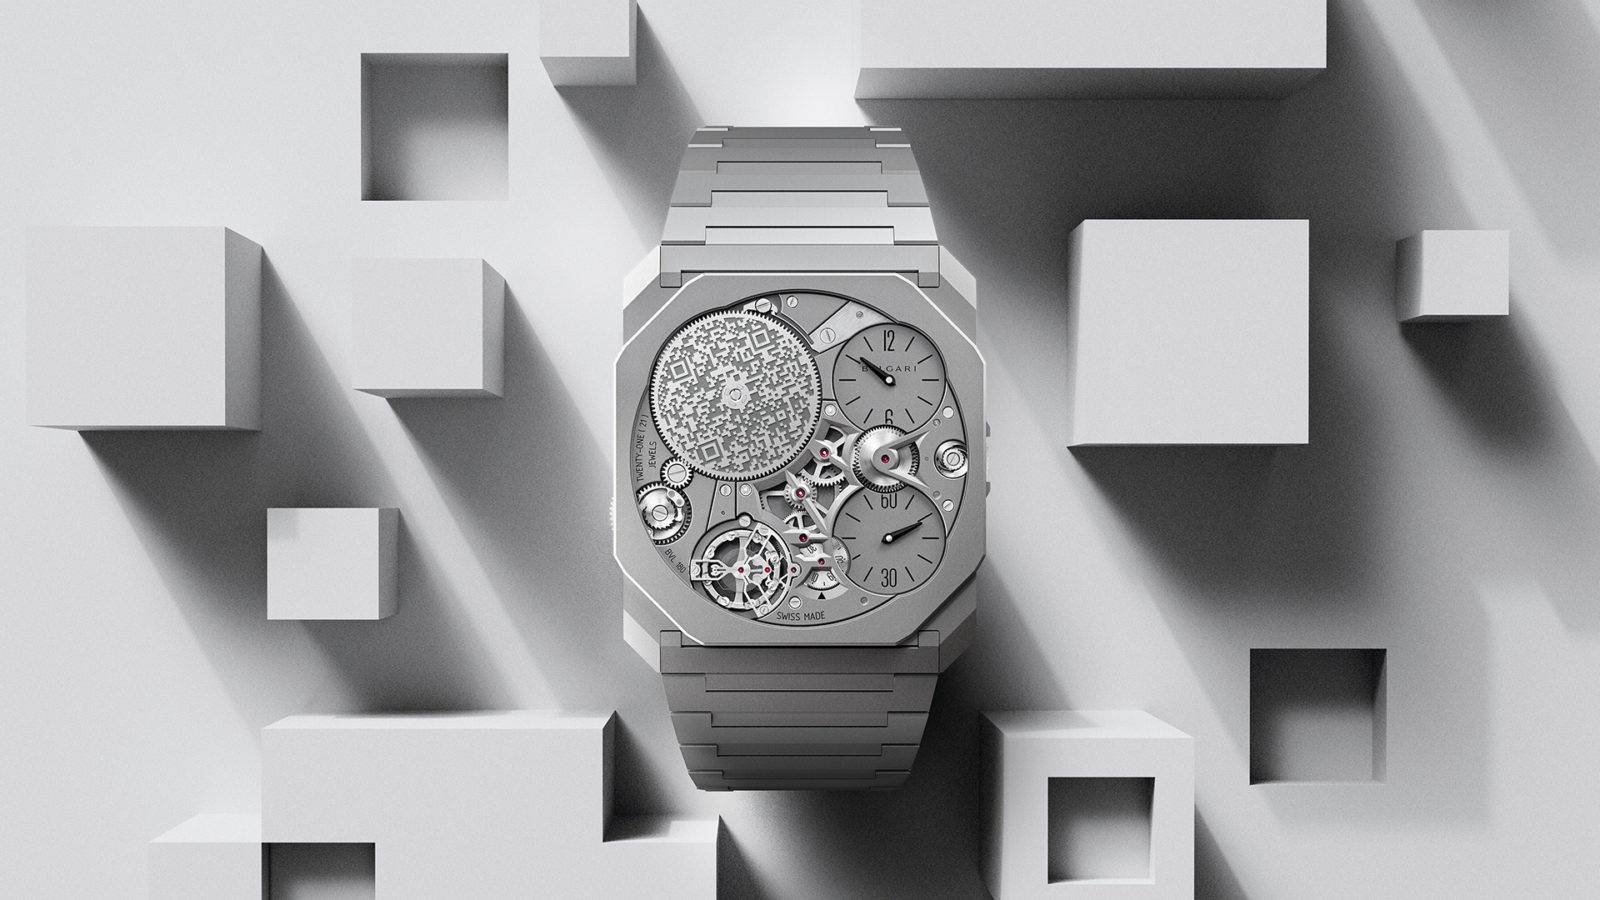 Bulgari launches Octo Finissimo Ultra, the world’s thinnest mechanical watch